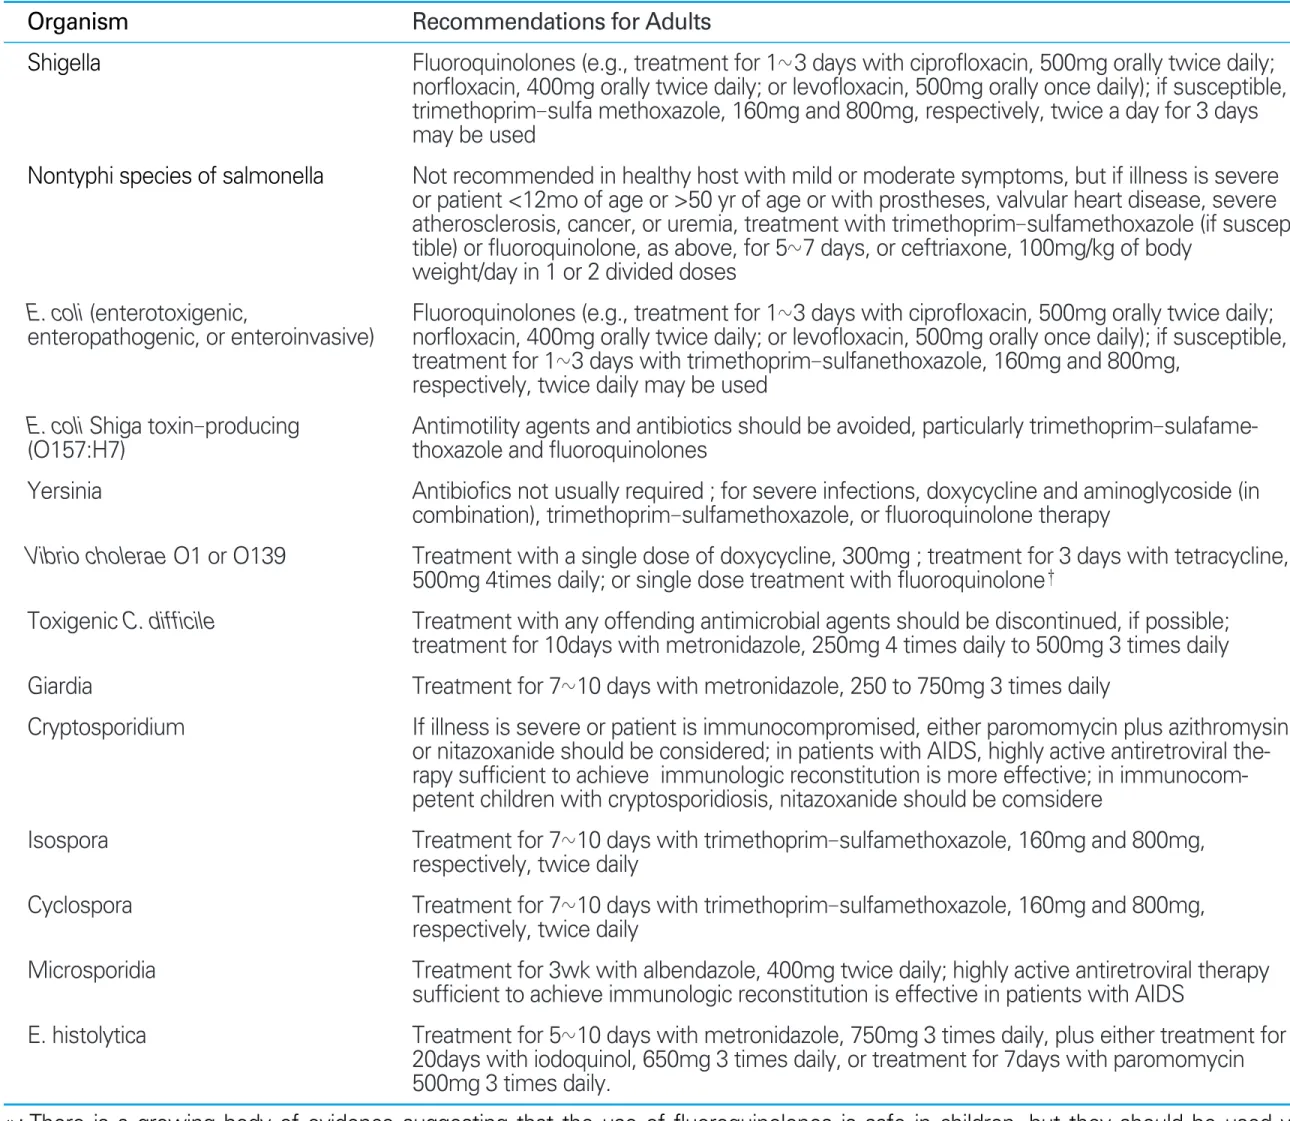 Table 3. Antimicrobial recommendations for infectious diarrhea with specific pathogen*